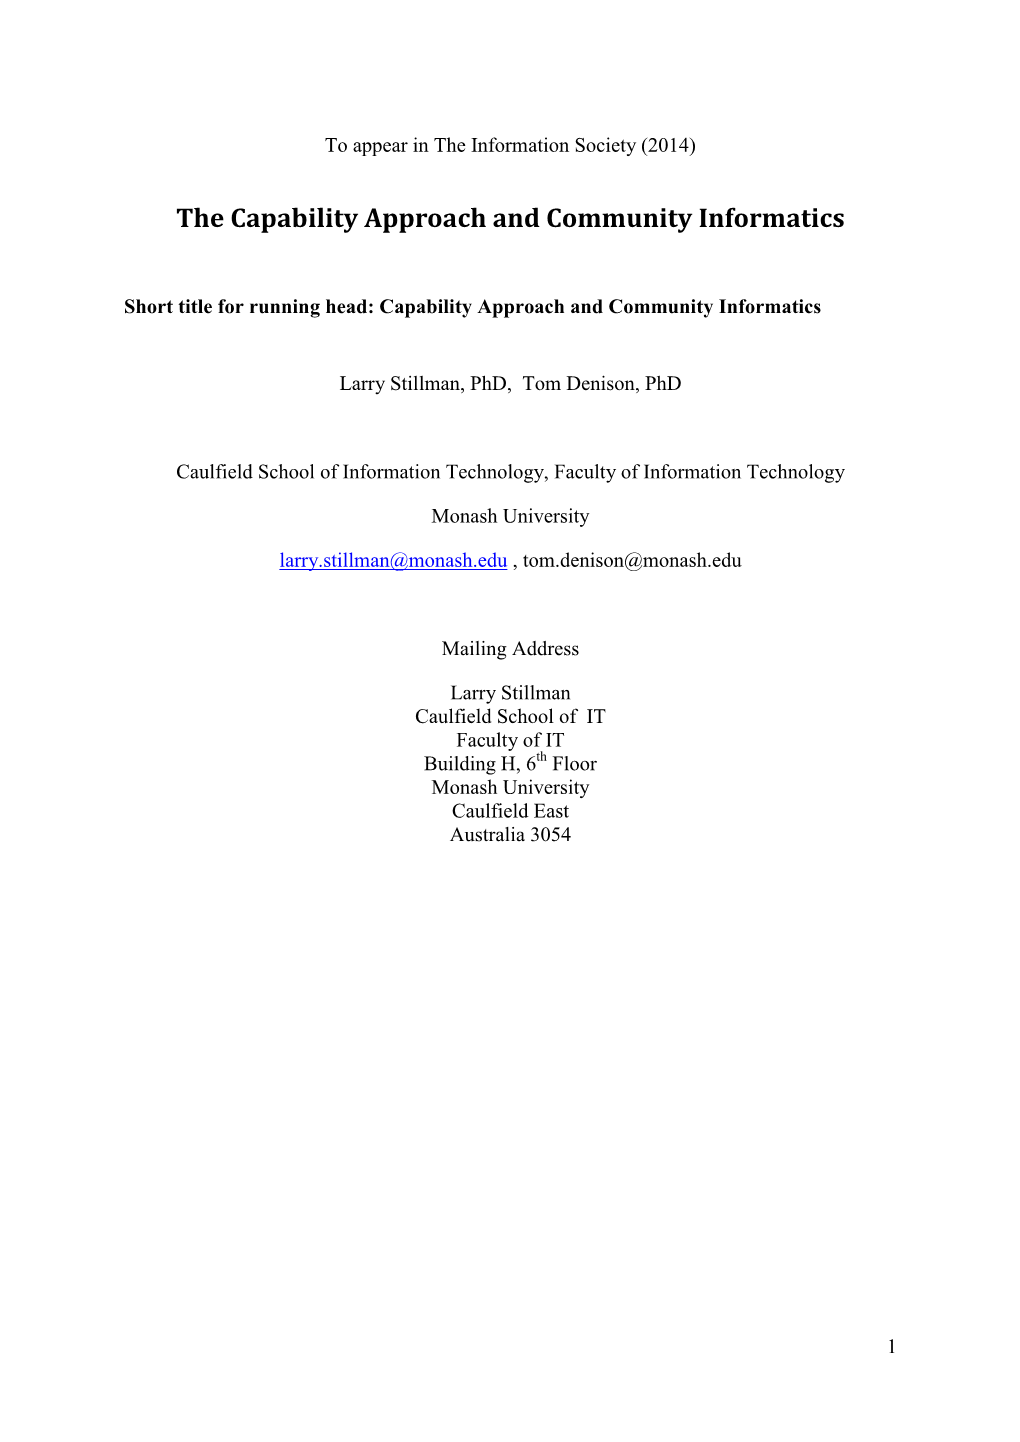 The Capability Approach and Community Informatics